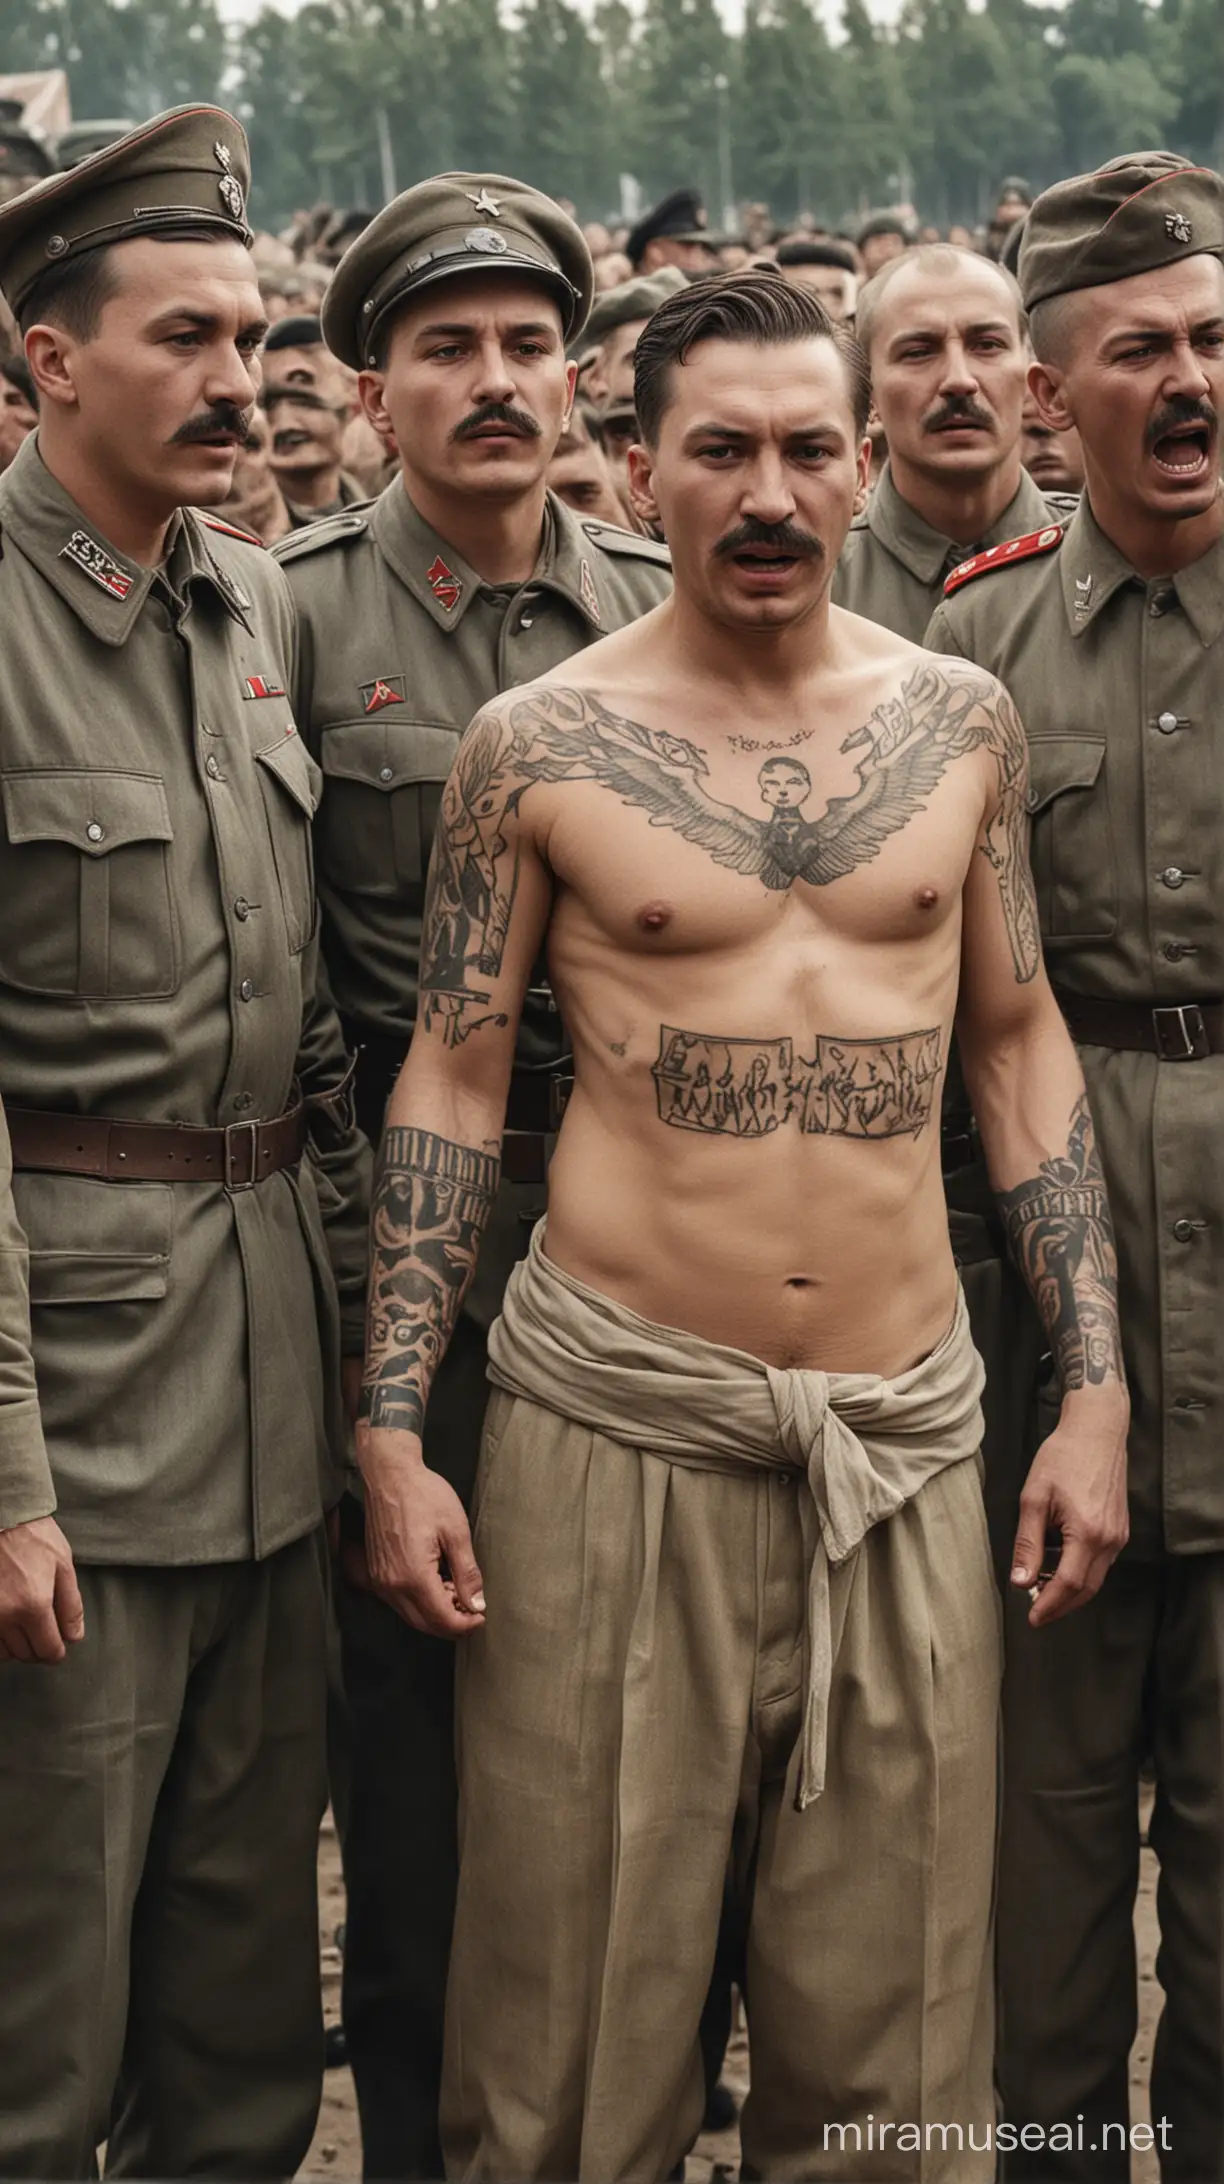 Nazi soldiers look on in astonishment as they catch a prisoner with a tattoo of Lenin and Stalin on his chest, who is about to be executed. The tattoo gives them pause, causing hesitation to shoot, and in the background, other prisoners are seen with similar tattoos.